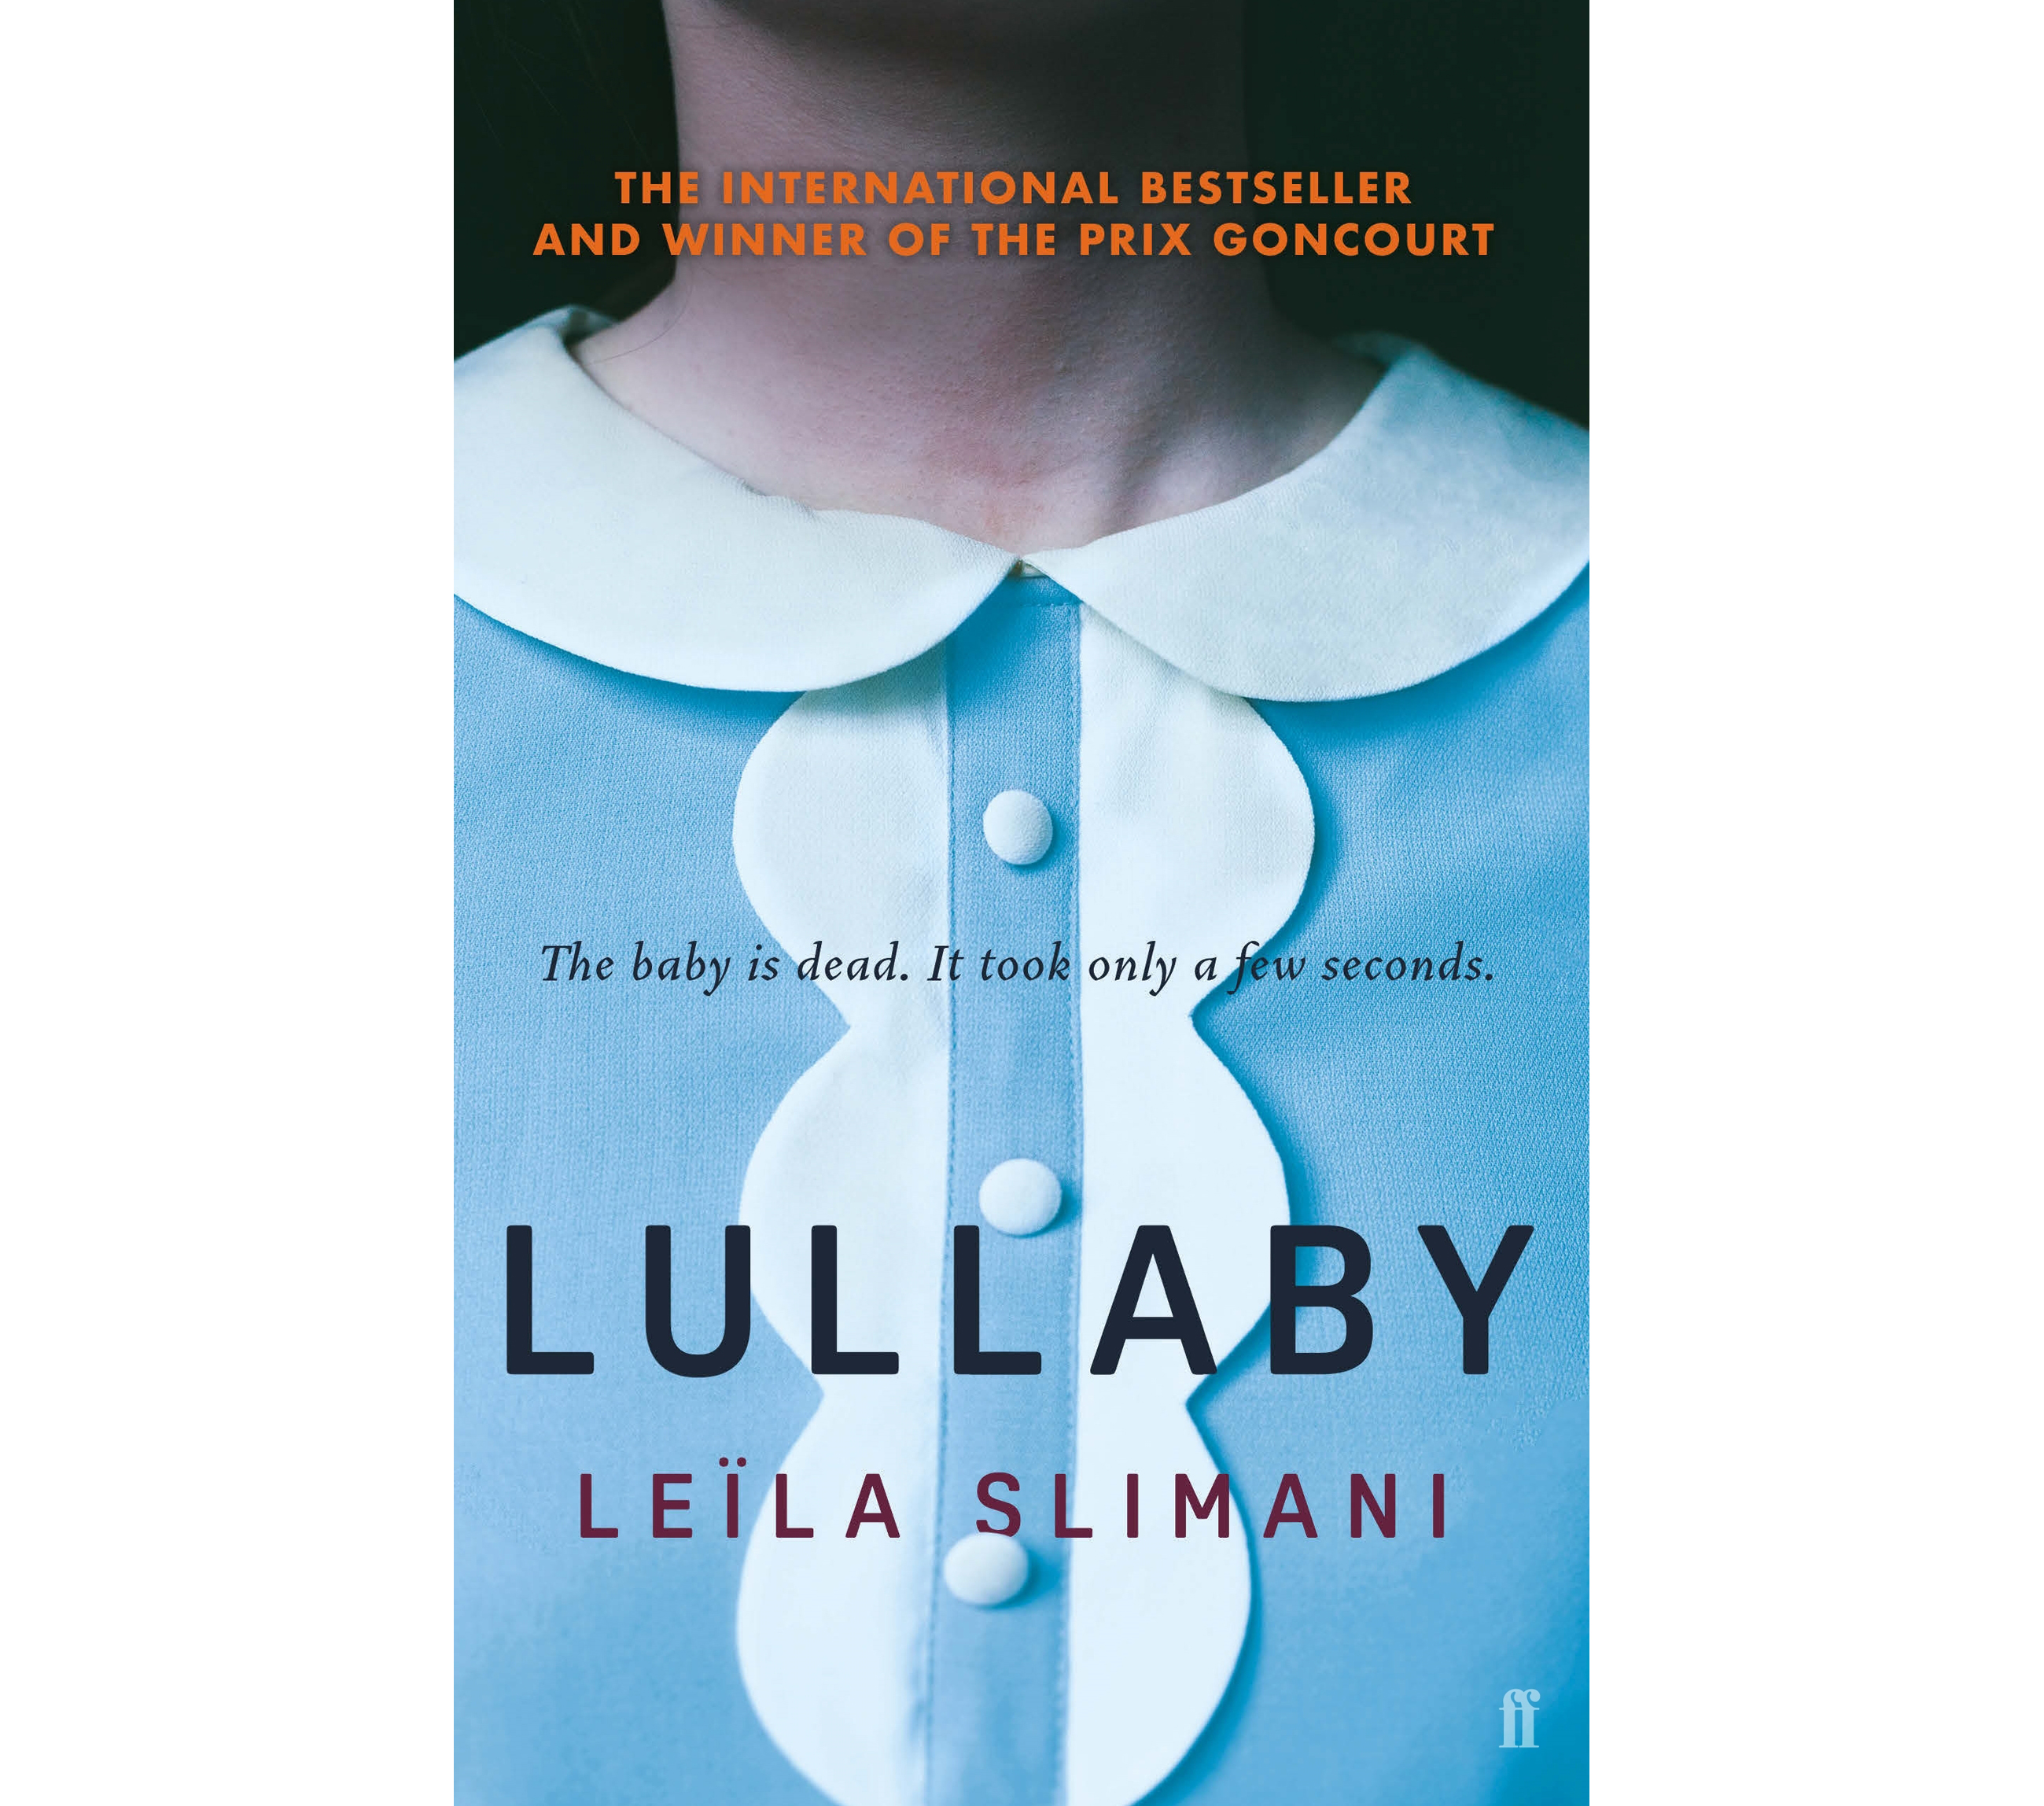 Lullaby by Leila Slimani (Faber/PA)